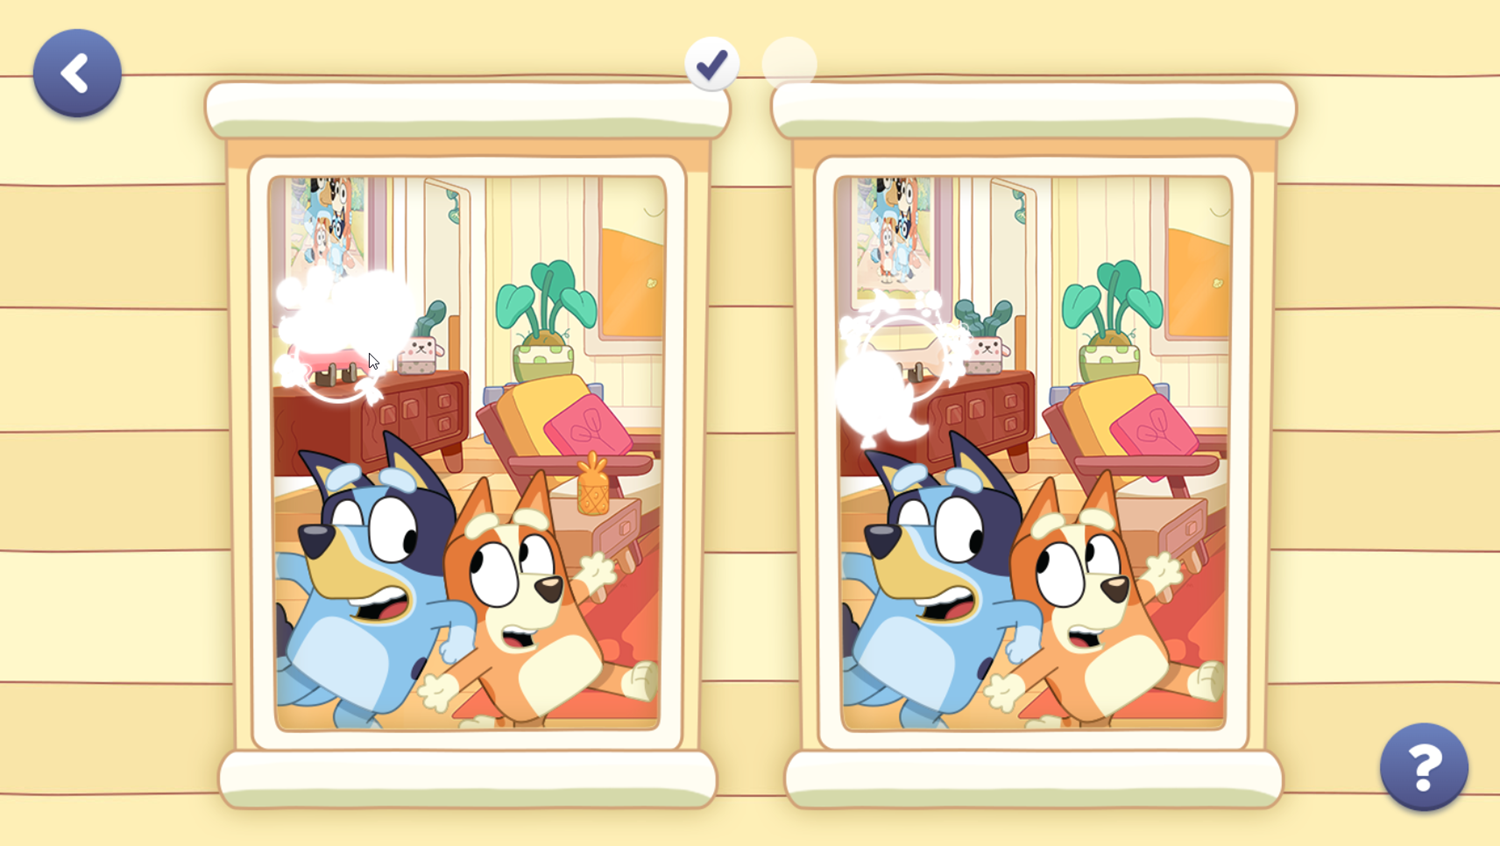 Disney Jr Matching Game Spot The Difference Game Play Screenshot.